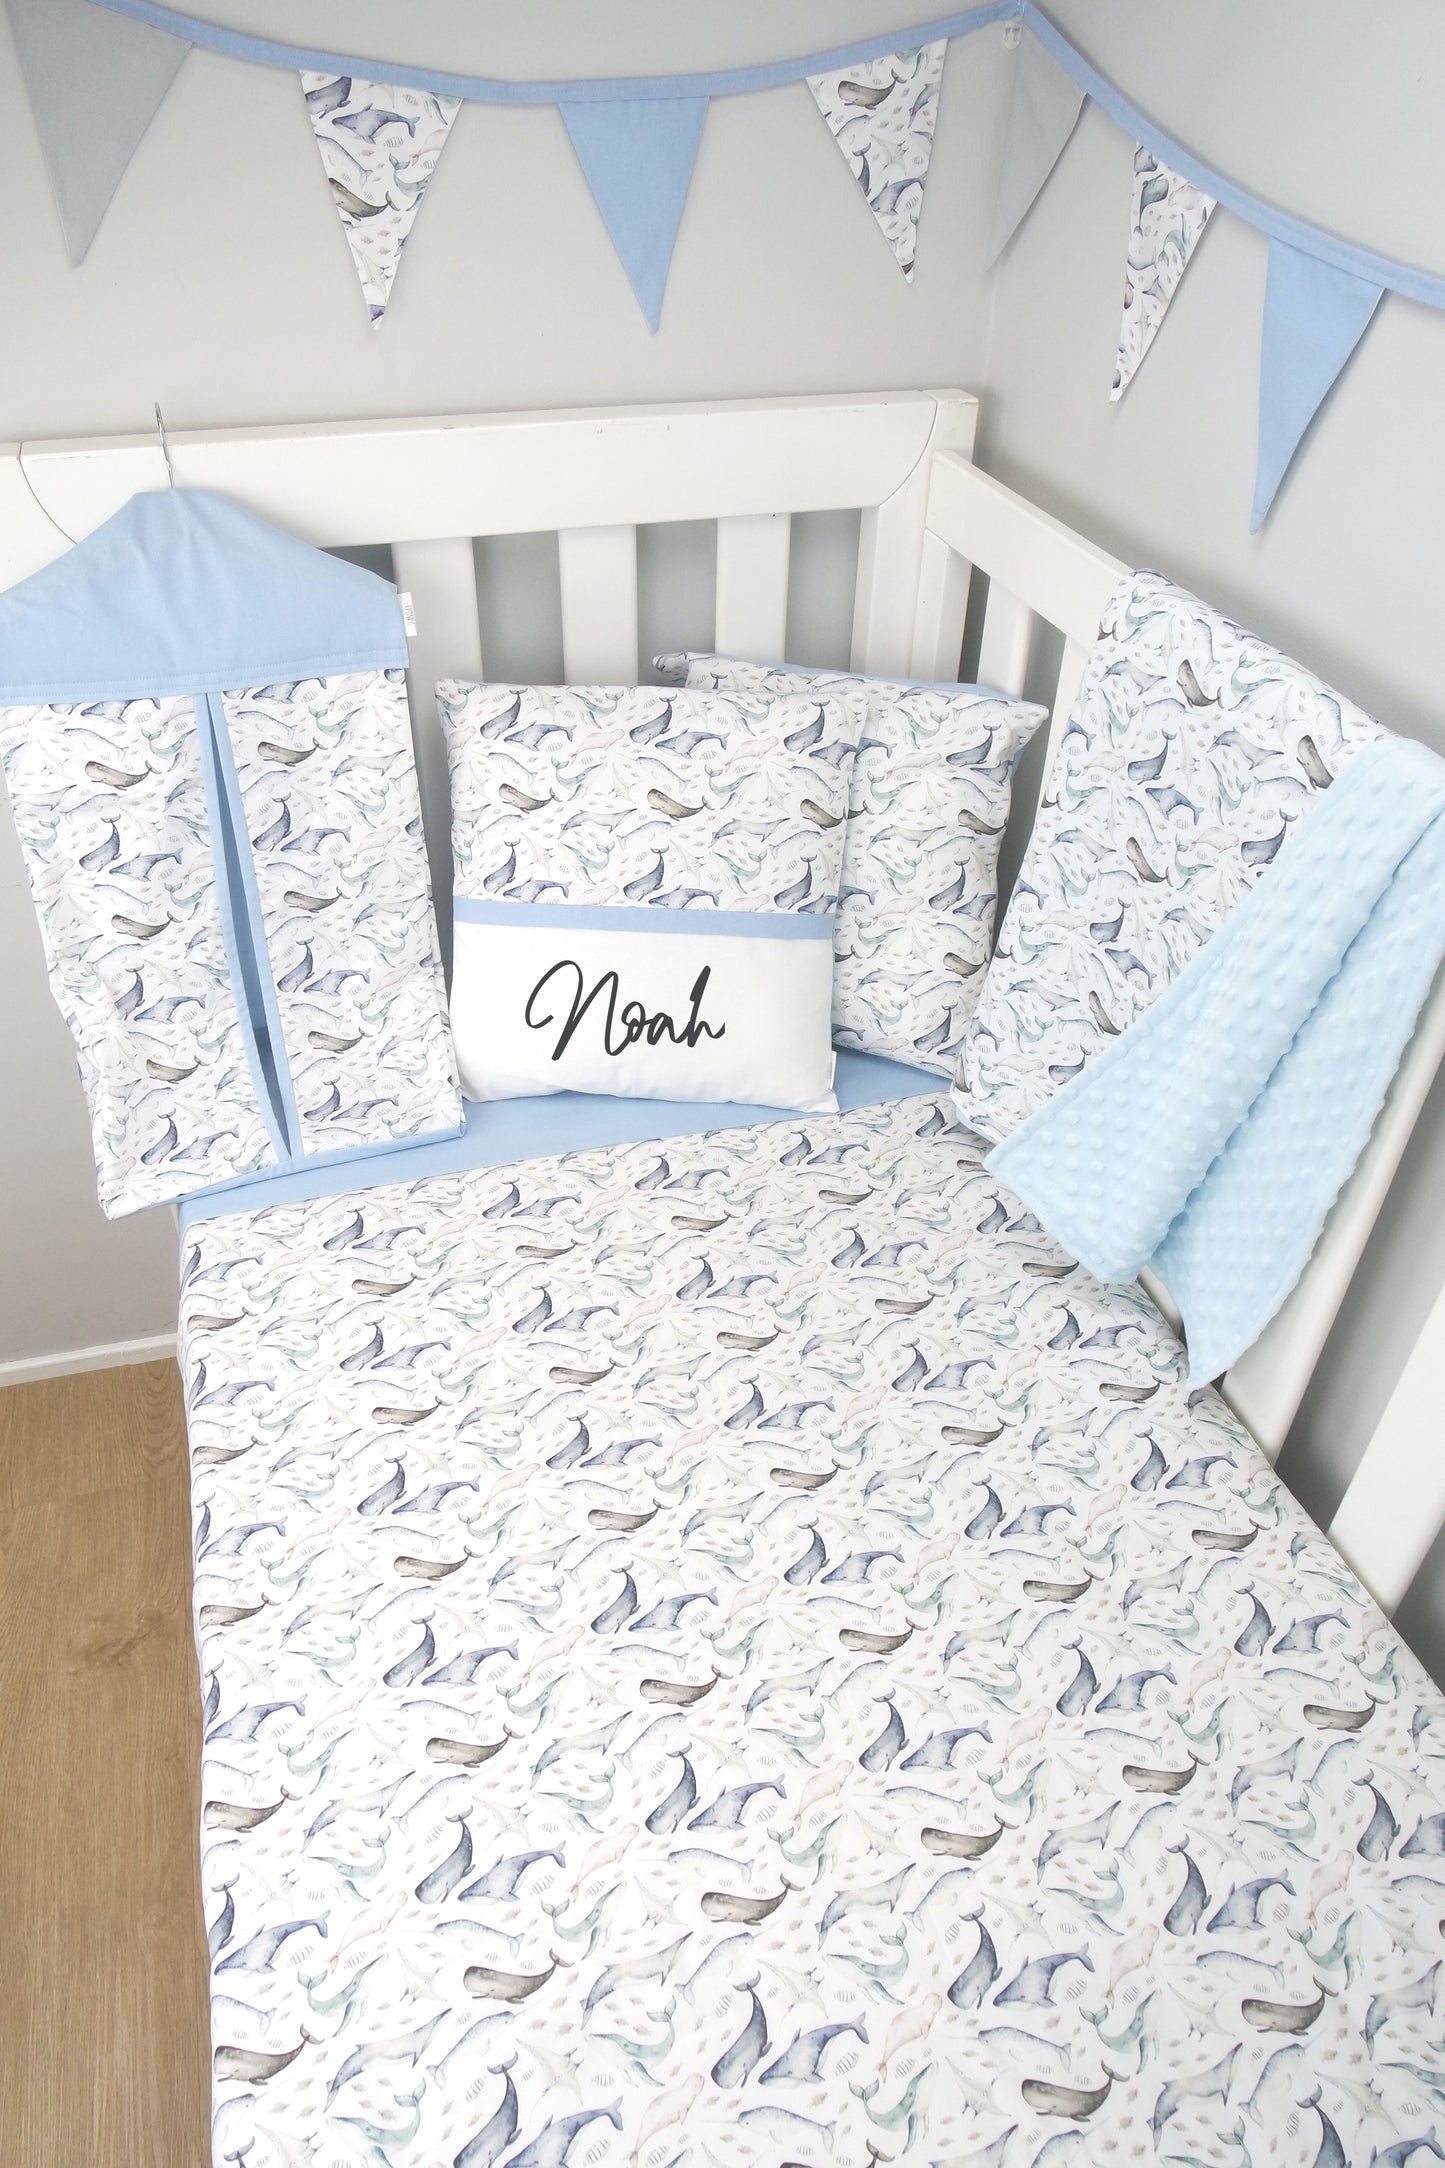 100% Cotton Cot/Bassinet Fitted Sheet or Change Table Cover - Under the Sea